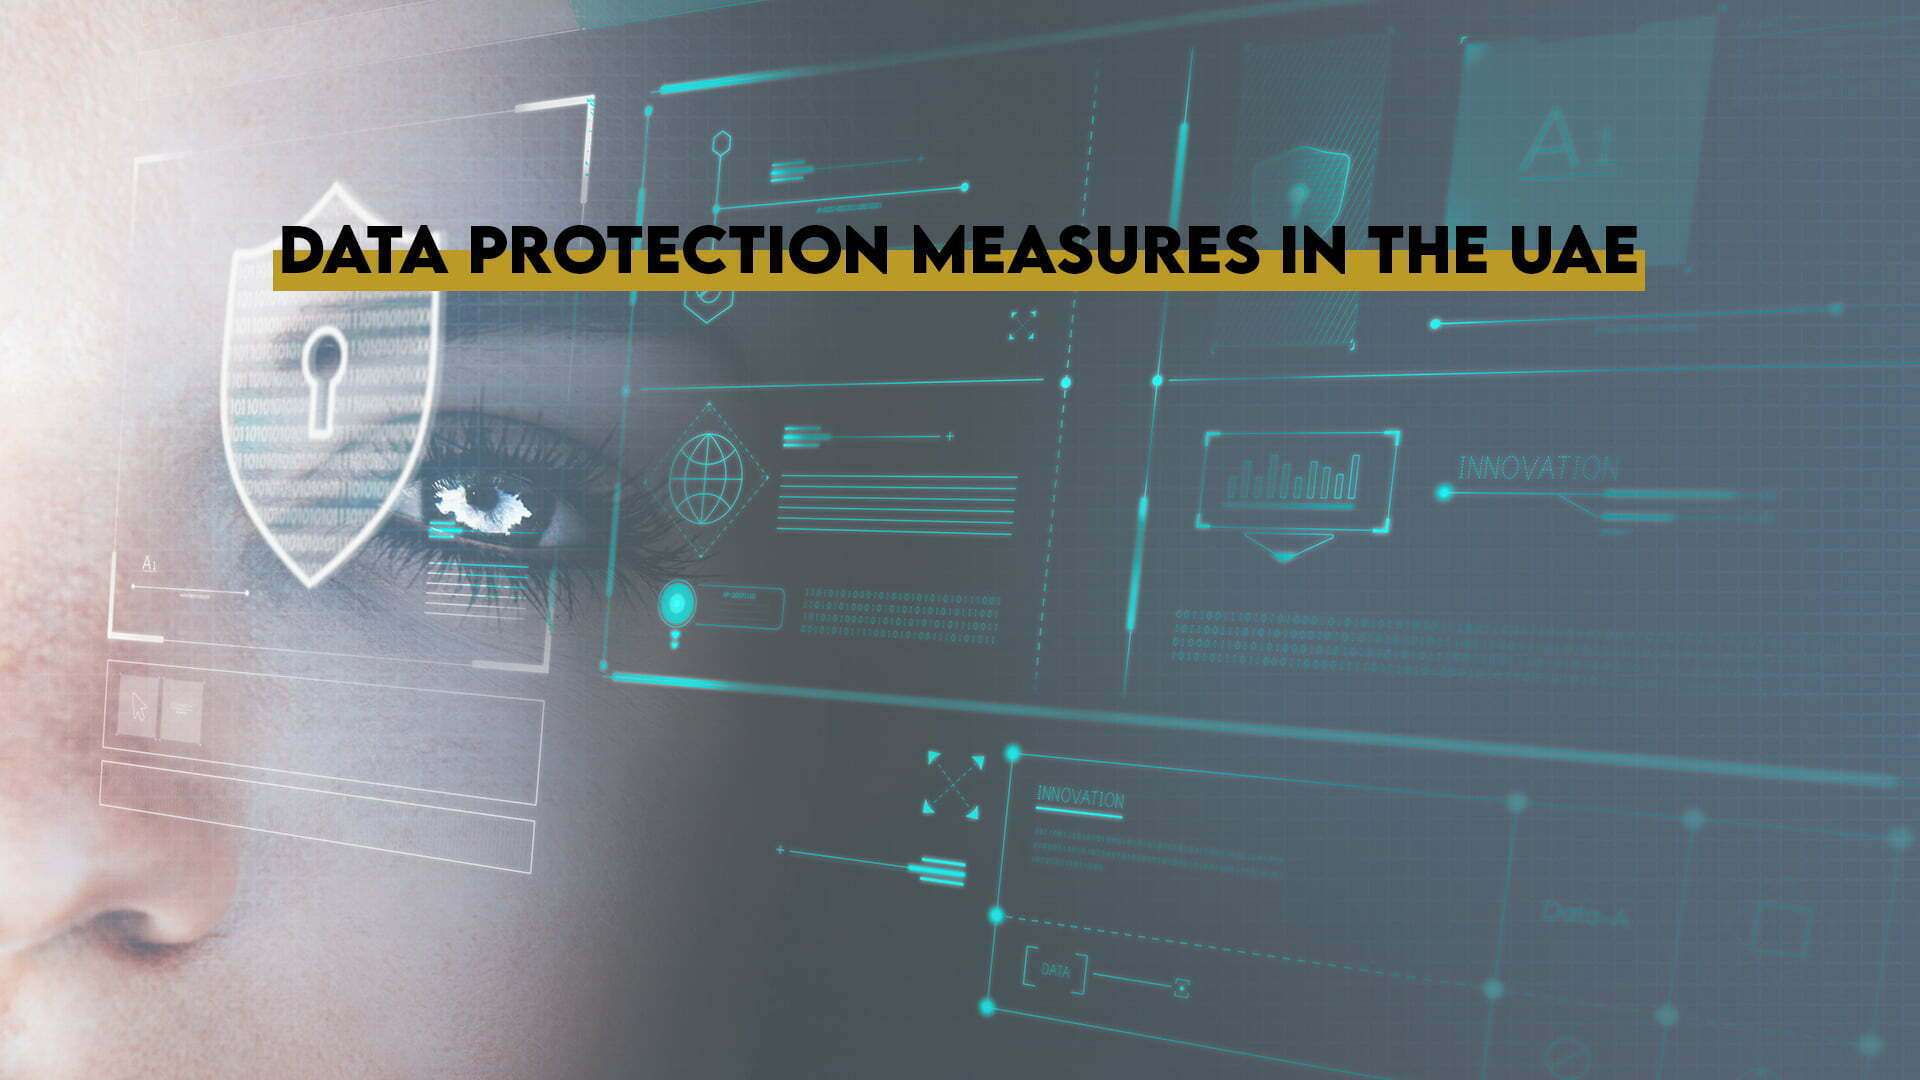 Personal Data Protection Measures in the UAE